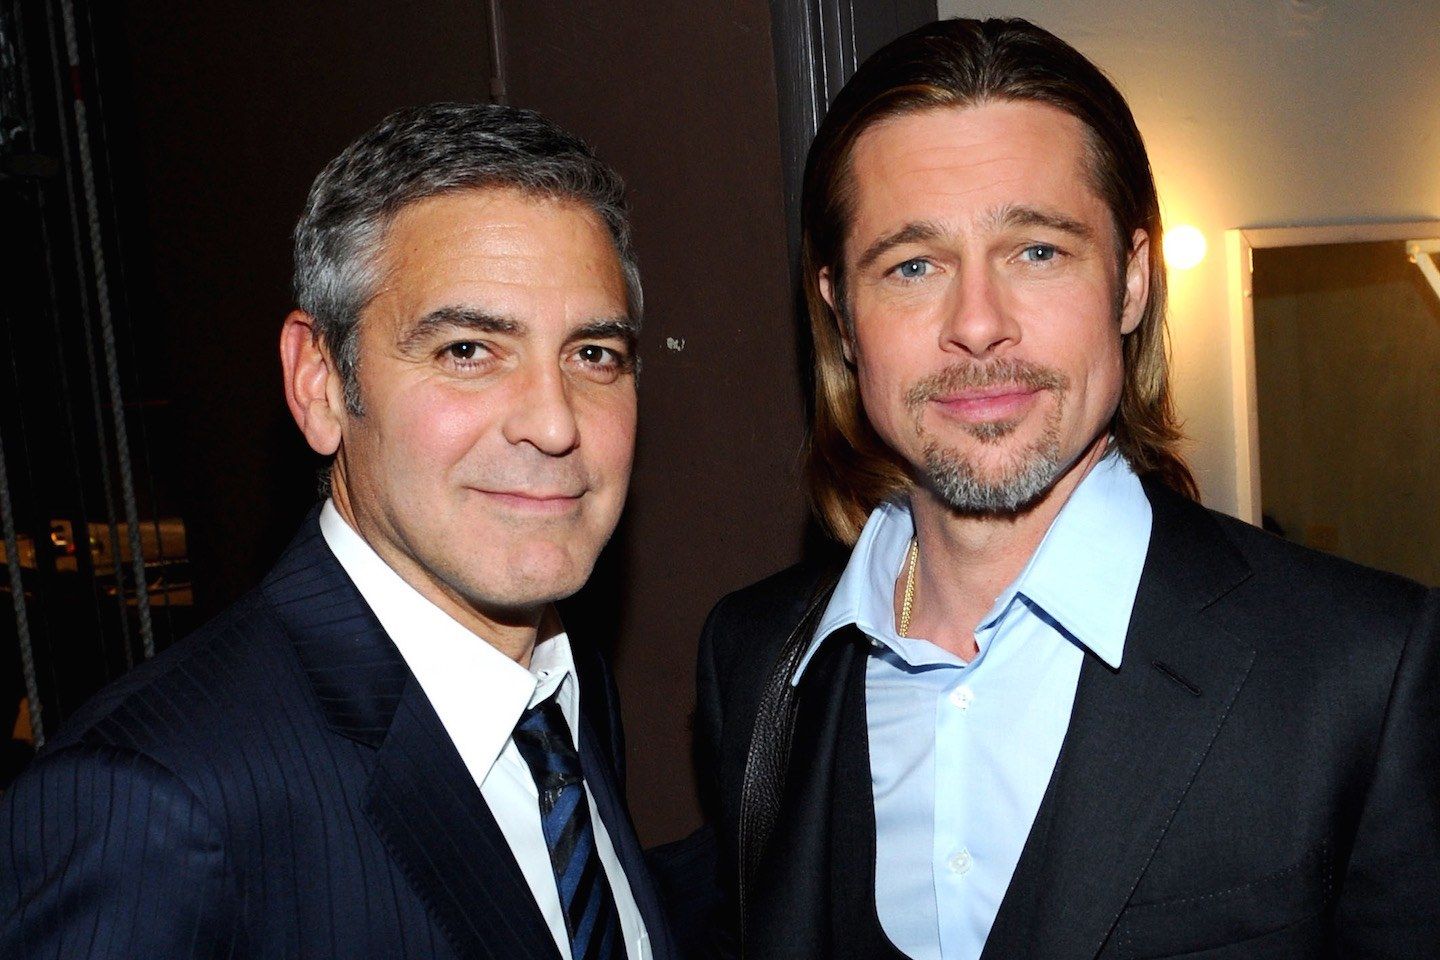 George Clooney To Make Brad Pitt Dress Up For Halloween Party?